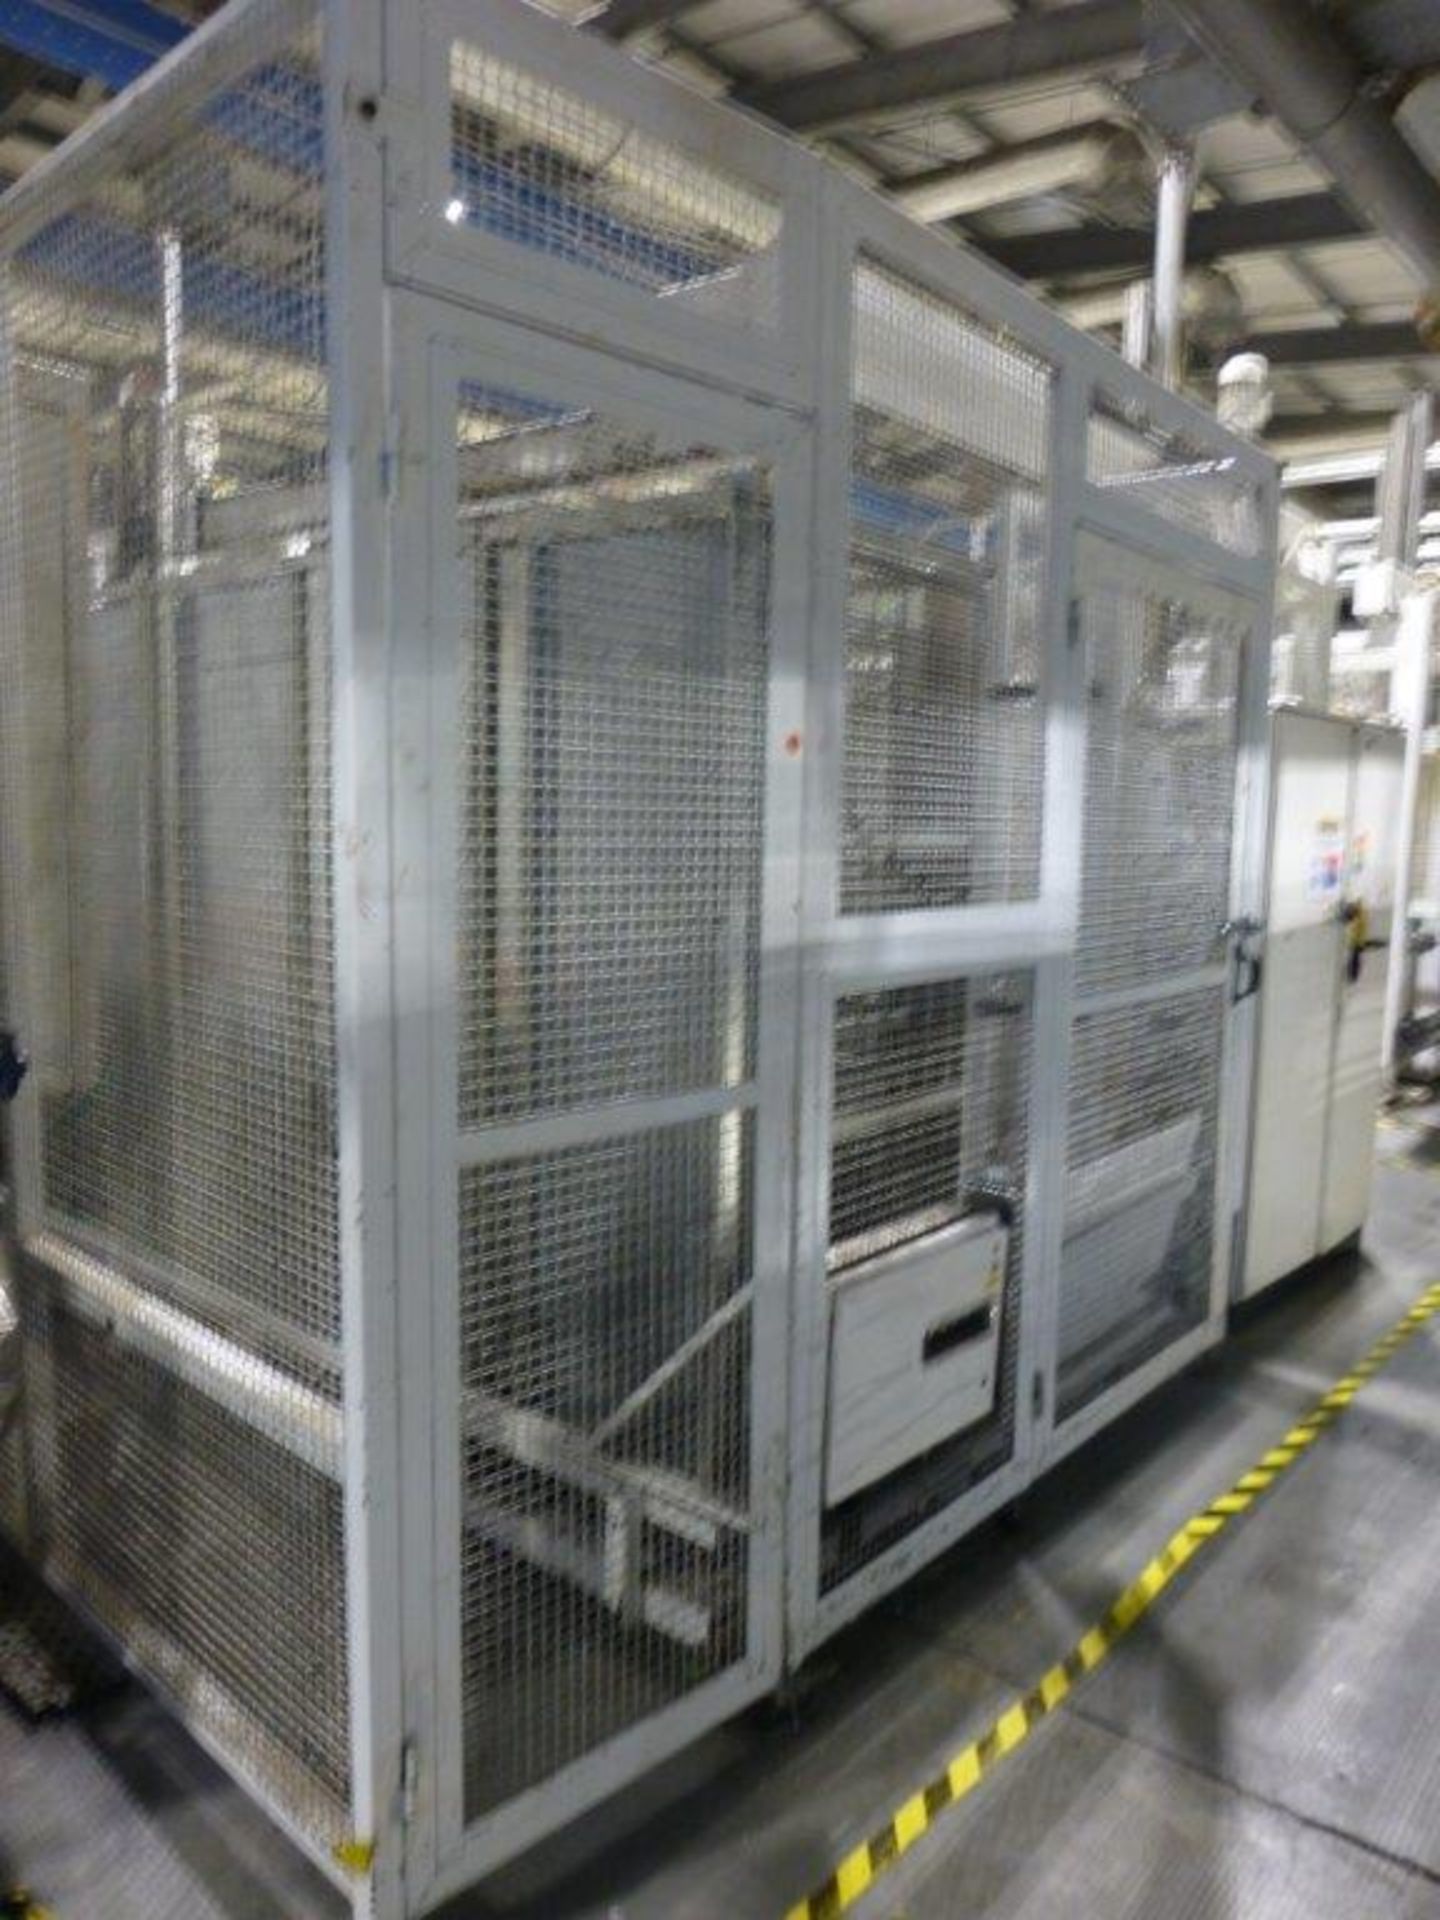 GMAT Model M53 CNC automated DVD case twin arm picking/stacking system with case closure unit, - Image 7 of 8